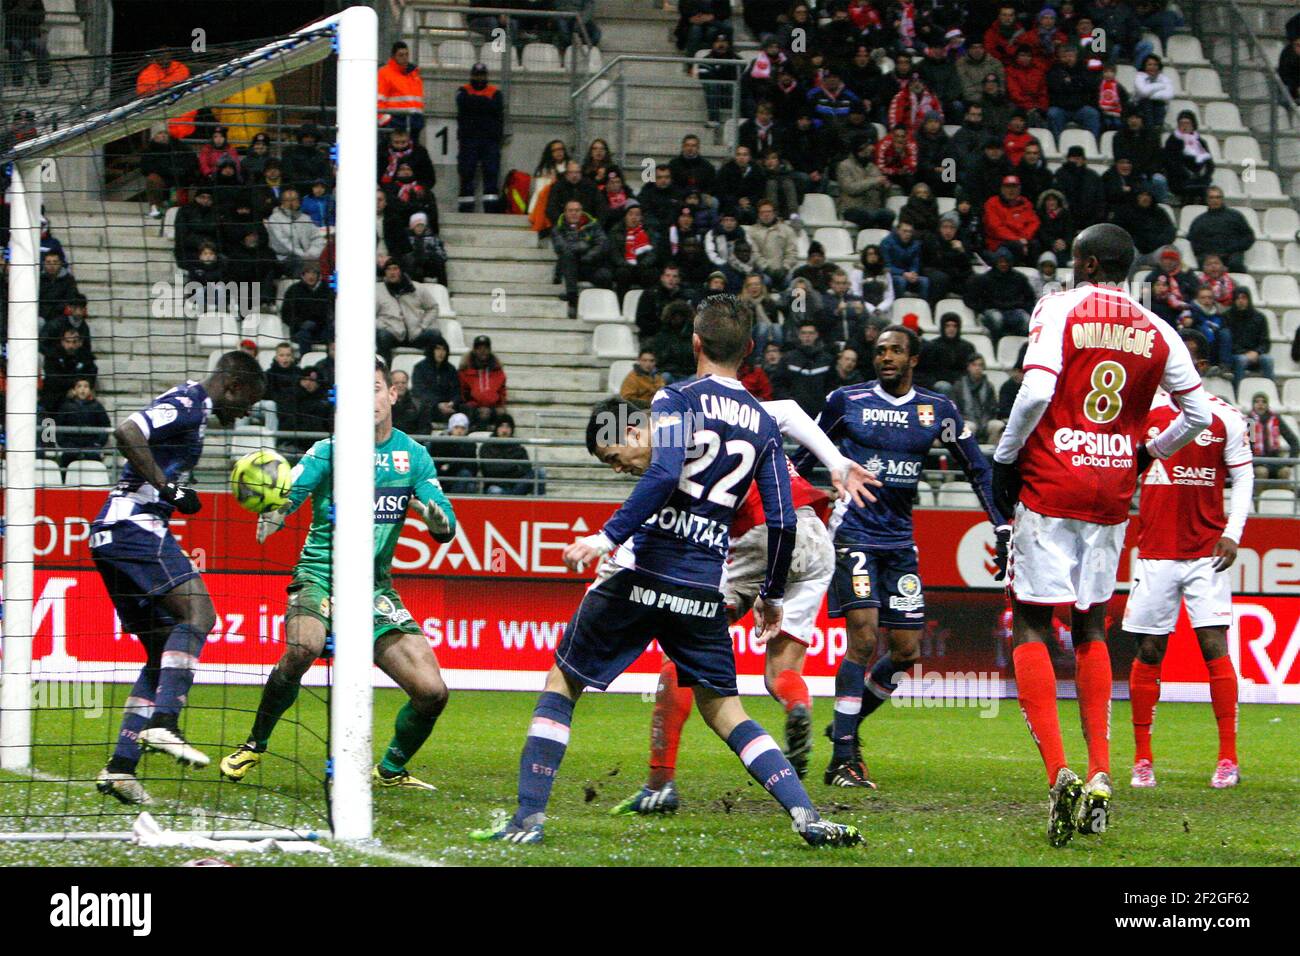 Aissa MANDI (RM) scores during the L1 french football championship match between Reims Marne and Evian TG at Auguste Delaune stadium in Reims on december 13, 2014 - Photo Anthony Serpe / DPPI Stock Photo